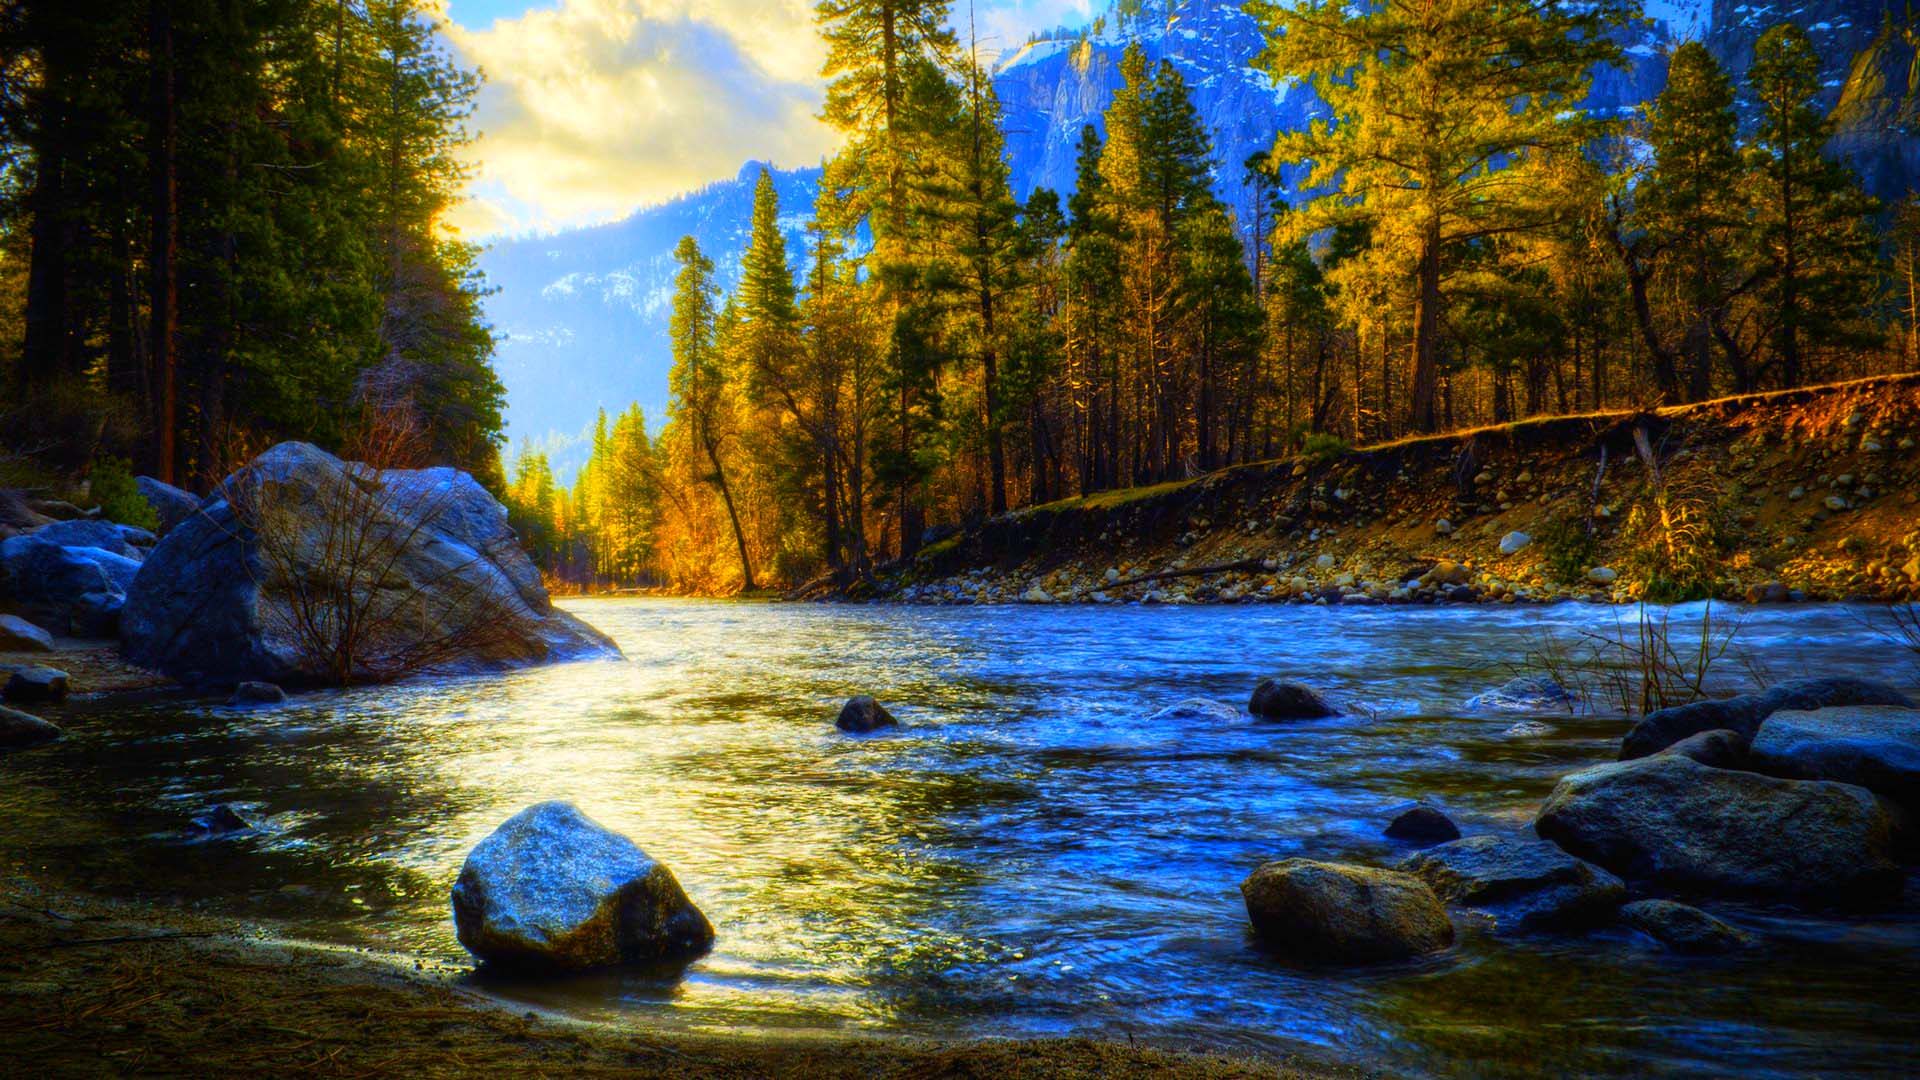 Spring River Nice Image Download Picture Photo Wallpaper Download